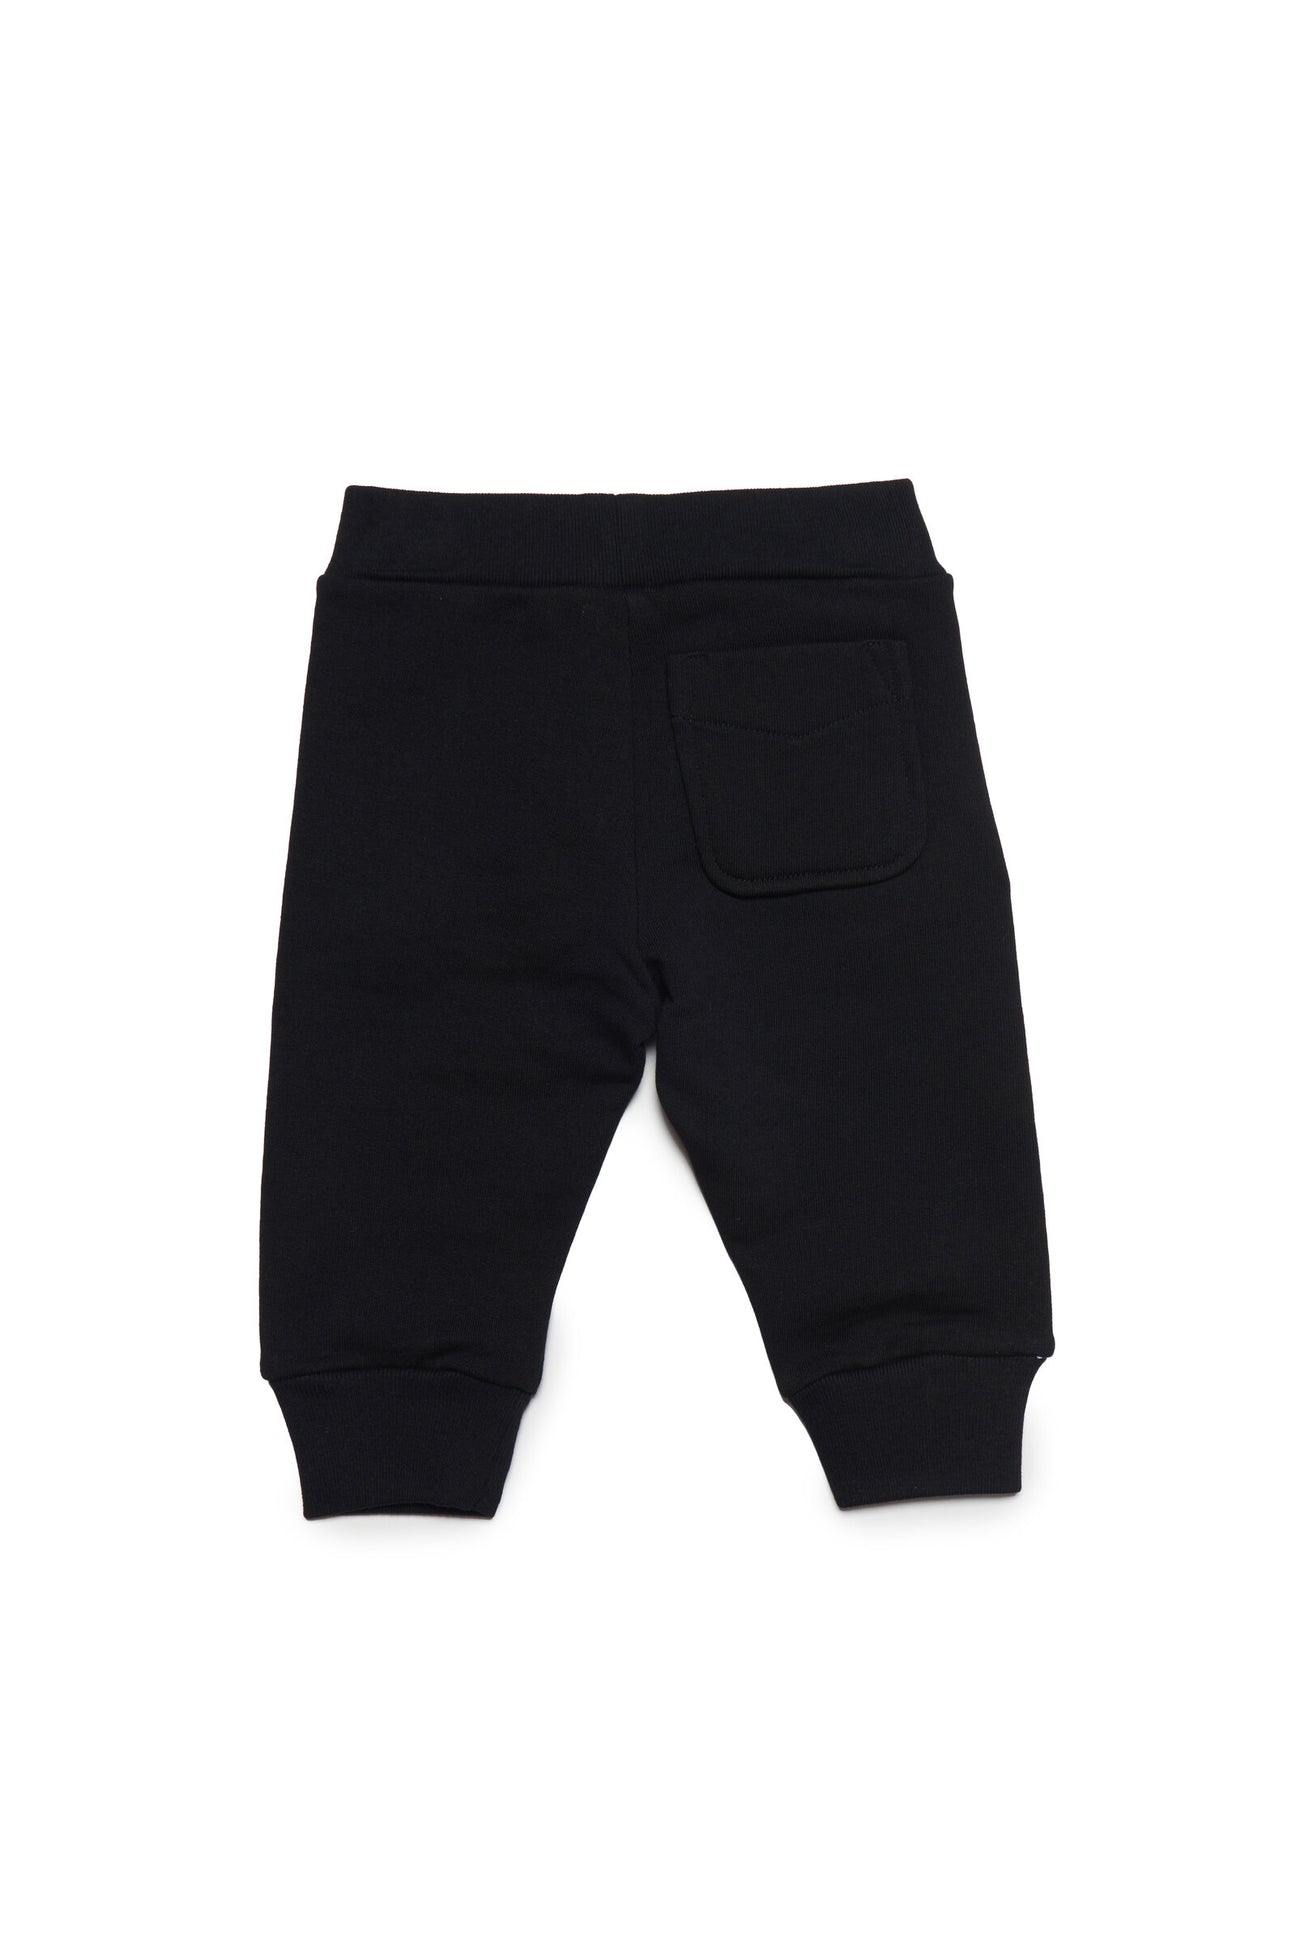 Black jogger pants with Diesel double logo and back pocket Black jogger pants with Diesel double logo and back pocket